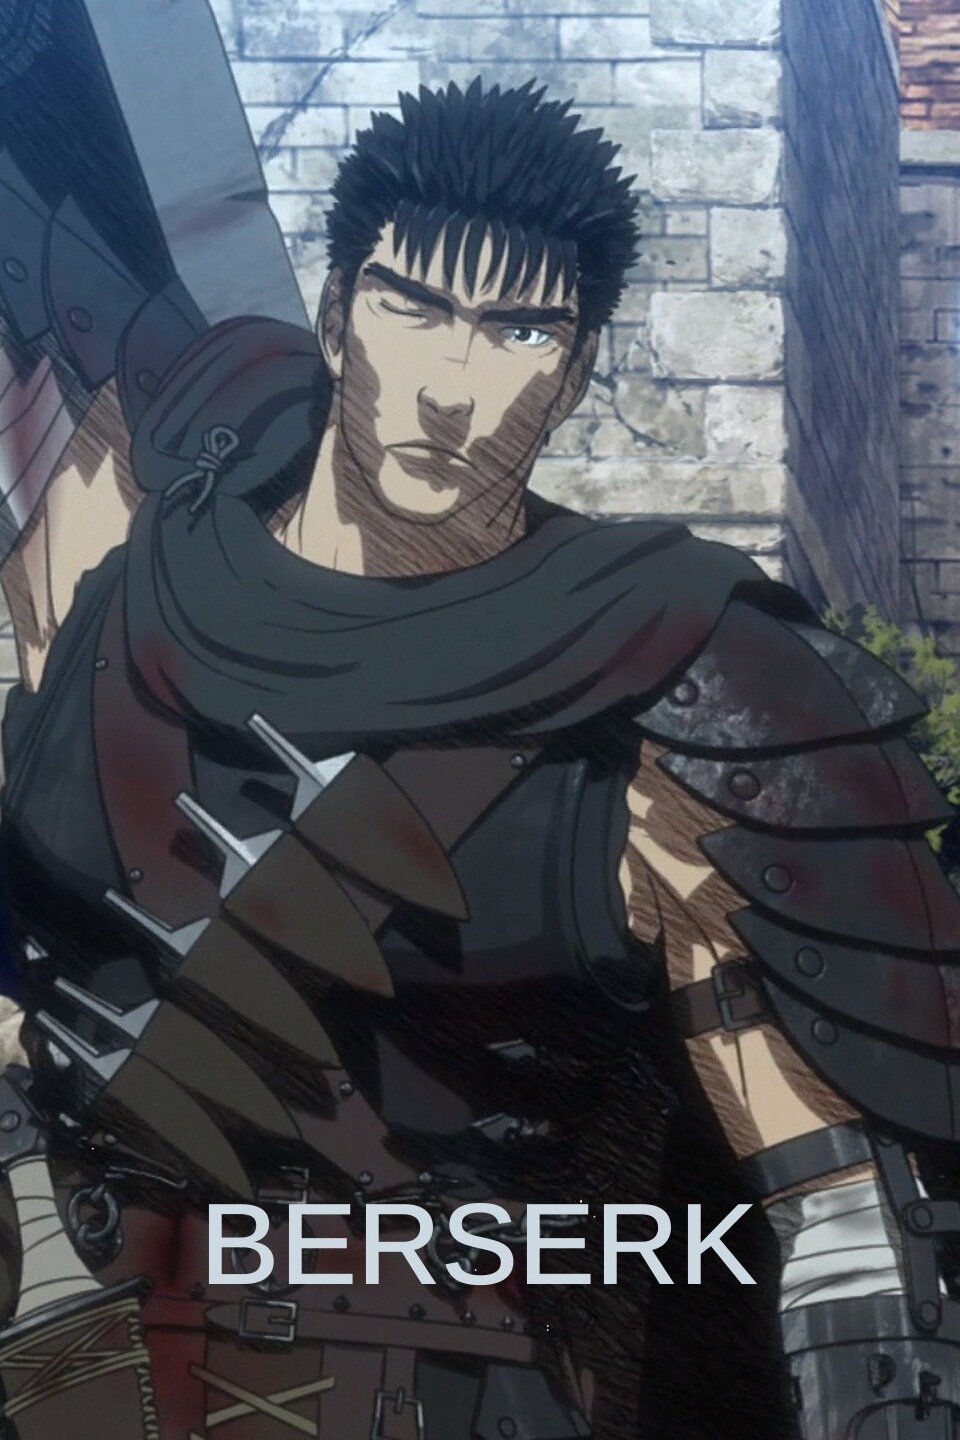 The original 1997 'Berserk' anime is coming to Netflix on December 1st in  select regions (updated)